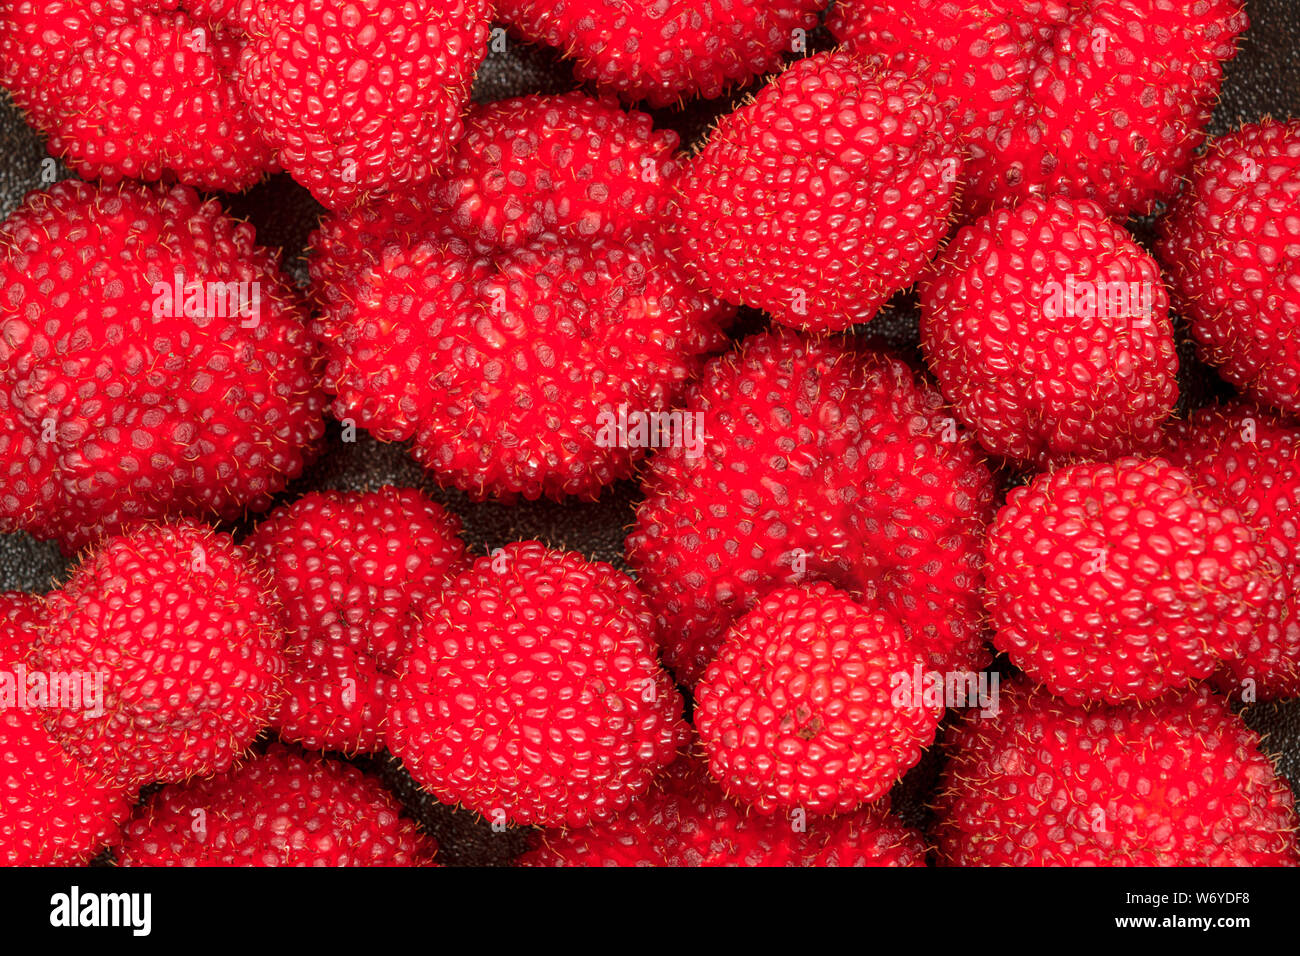 Background of fresh and ripe red balloon berries (Rubus Illecebrosus) on black iron cast background Stock Photo